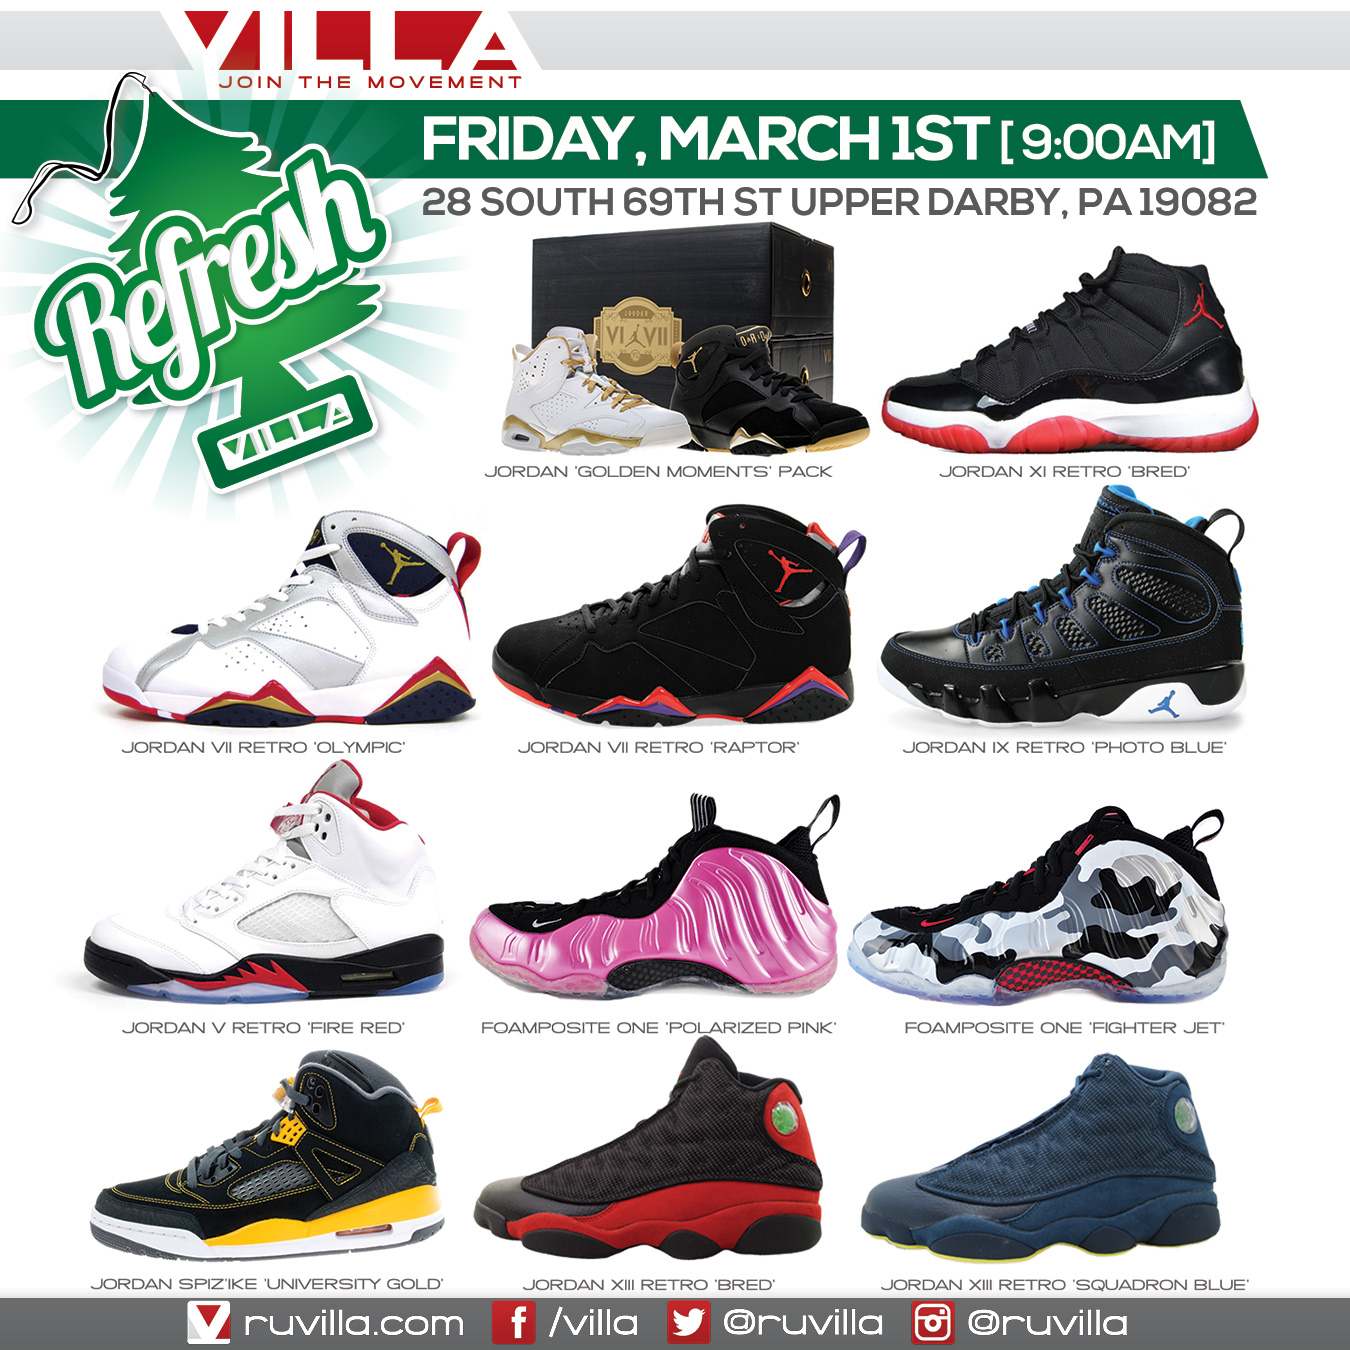 grand-opening-villa-69th-street-with-jim-jones-meet-greet-free-gift-cards-sneaker-re-releases-more-HHS1987-2013-3 [GRAND OPENING] VILLA 69th Street, With Jim Jones Meet & Greet, Free Gift Cards, Sneaker Re-Releases & more  